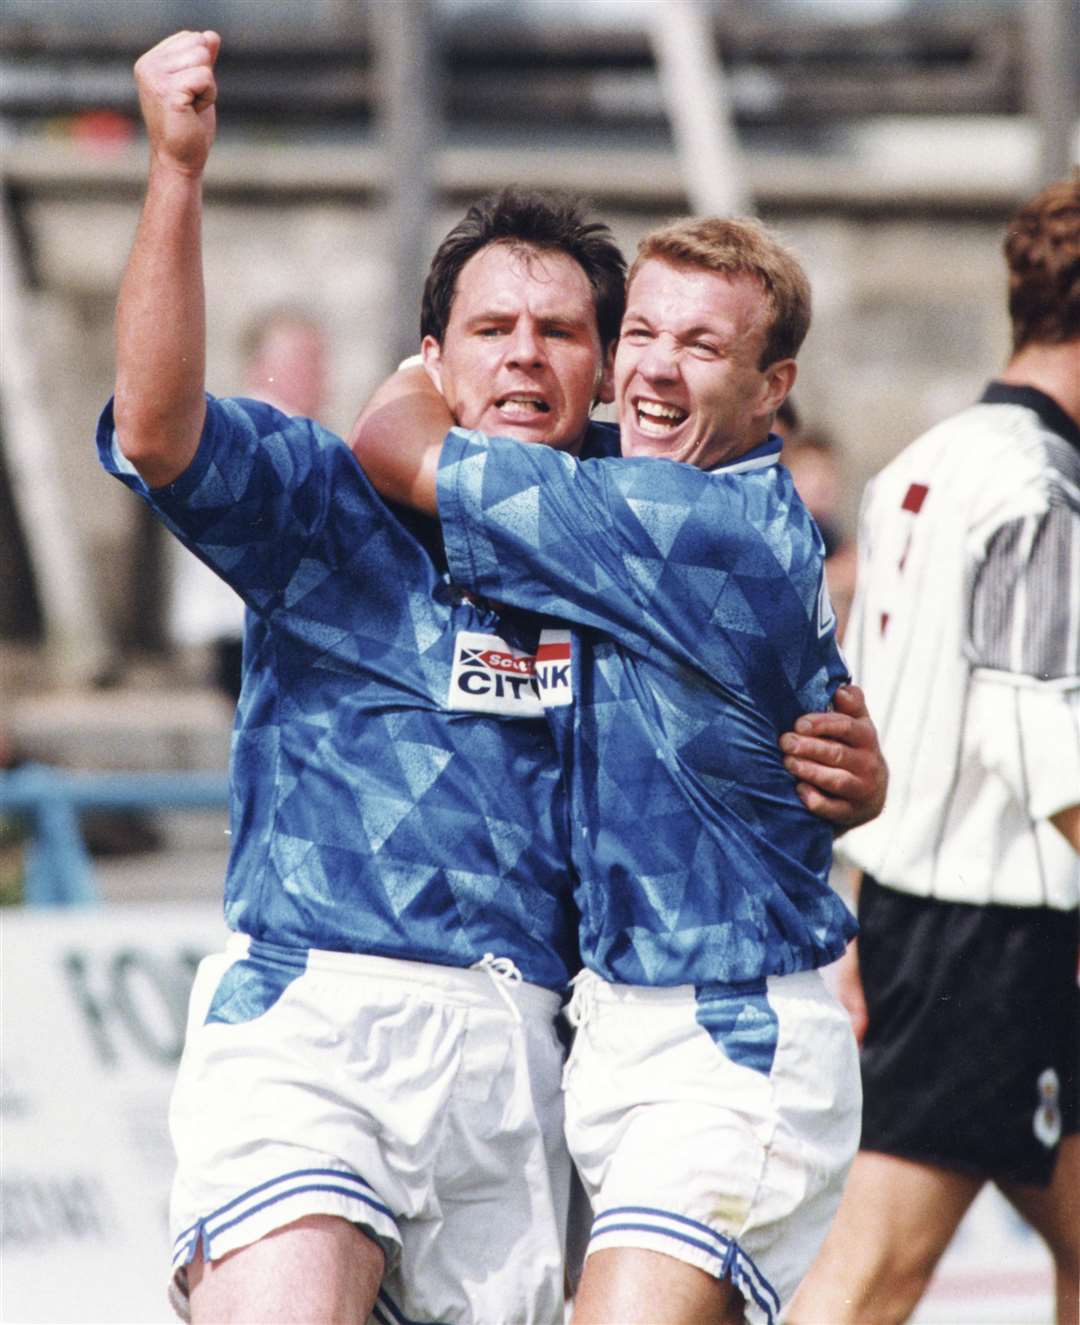 The late, great Alan Hercher (left) celebrates the club's first ever league goal with defender Mark McAllister as they beat Arbroath 5-2 in their debut outing in Scotland's Third Division. McAllister would later net the first Scottish Cup goal for the club.